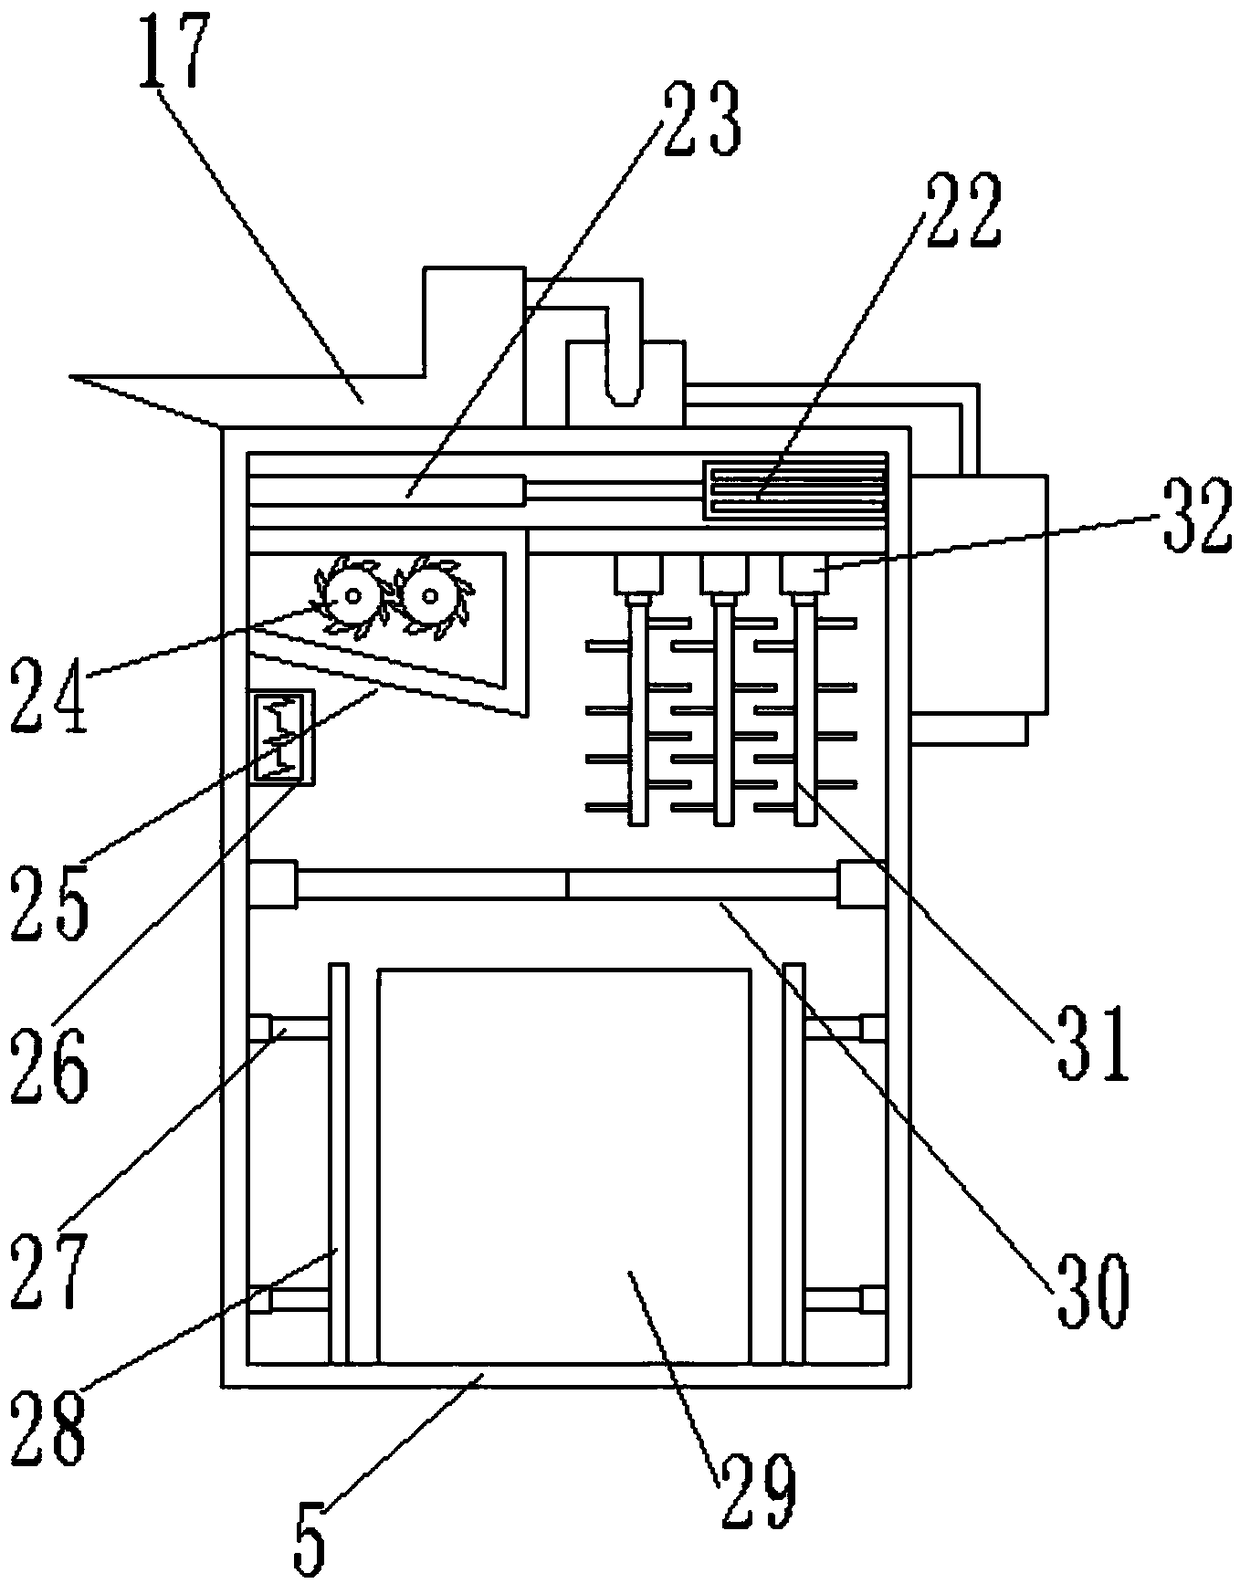 Organic waste crushing and recycling device for agricultural production